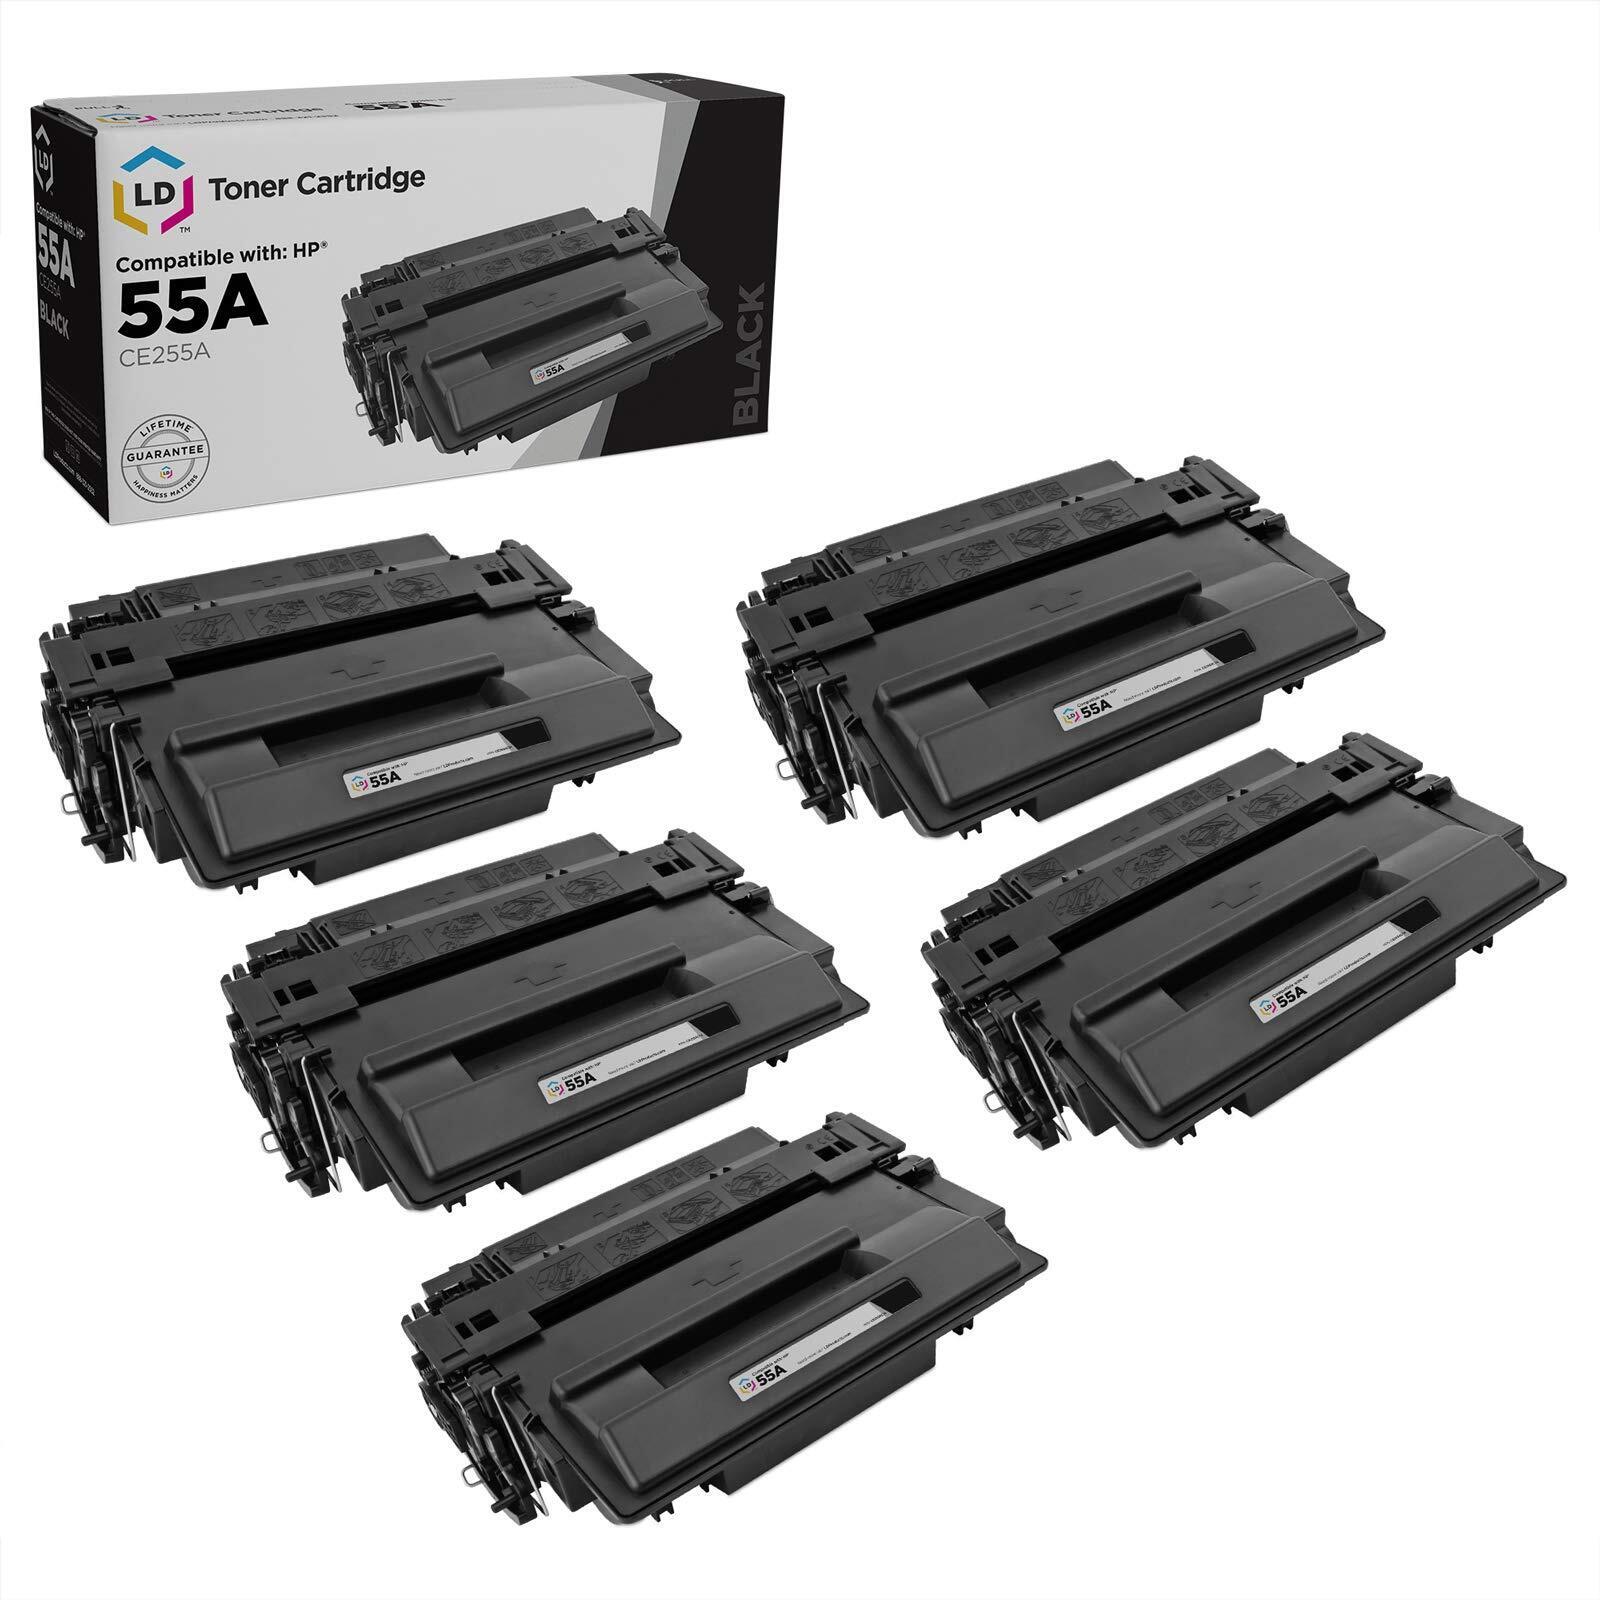 LD Products Replacements for HP 55A 55 CE255A CE255 Toner Cartridge (5PK)